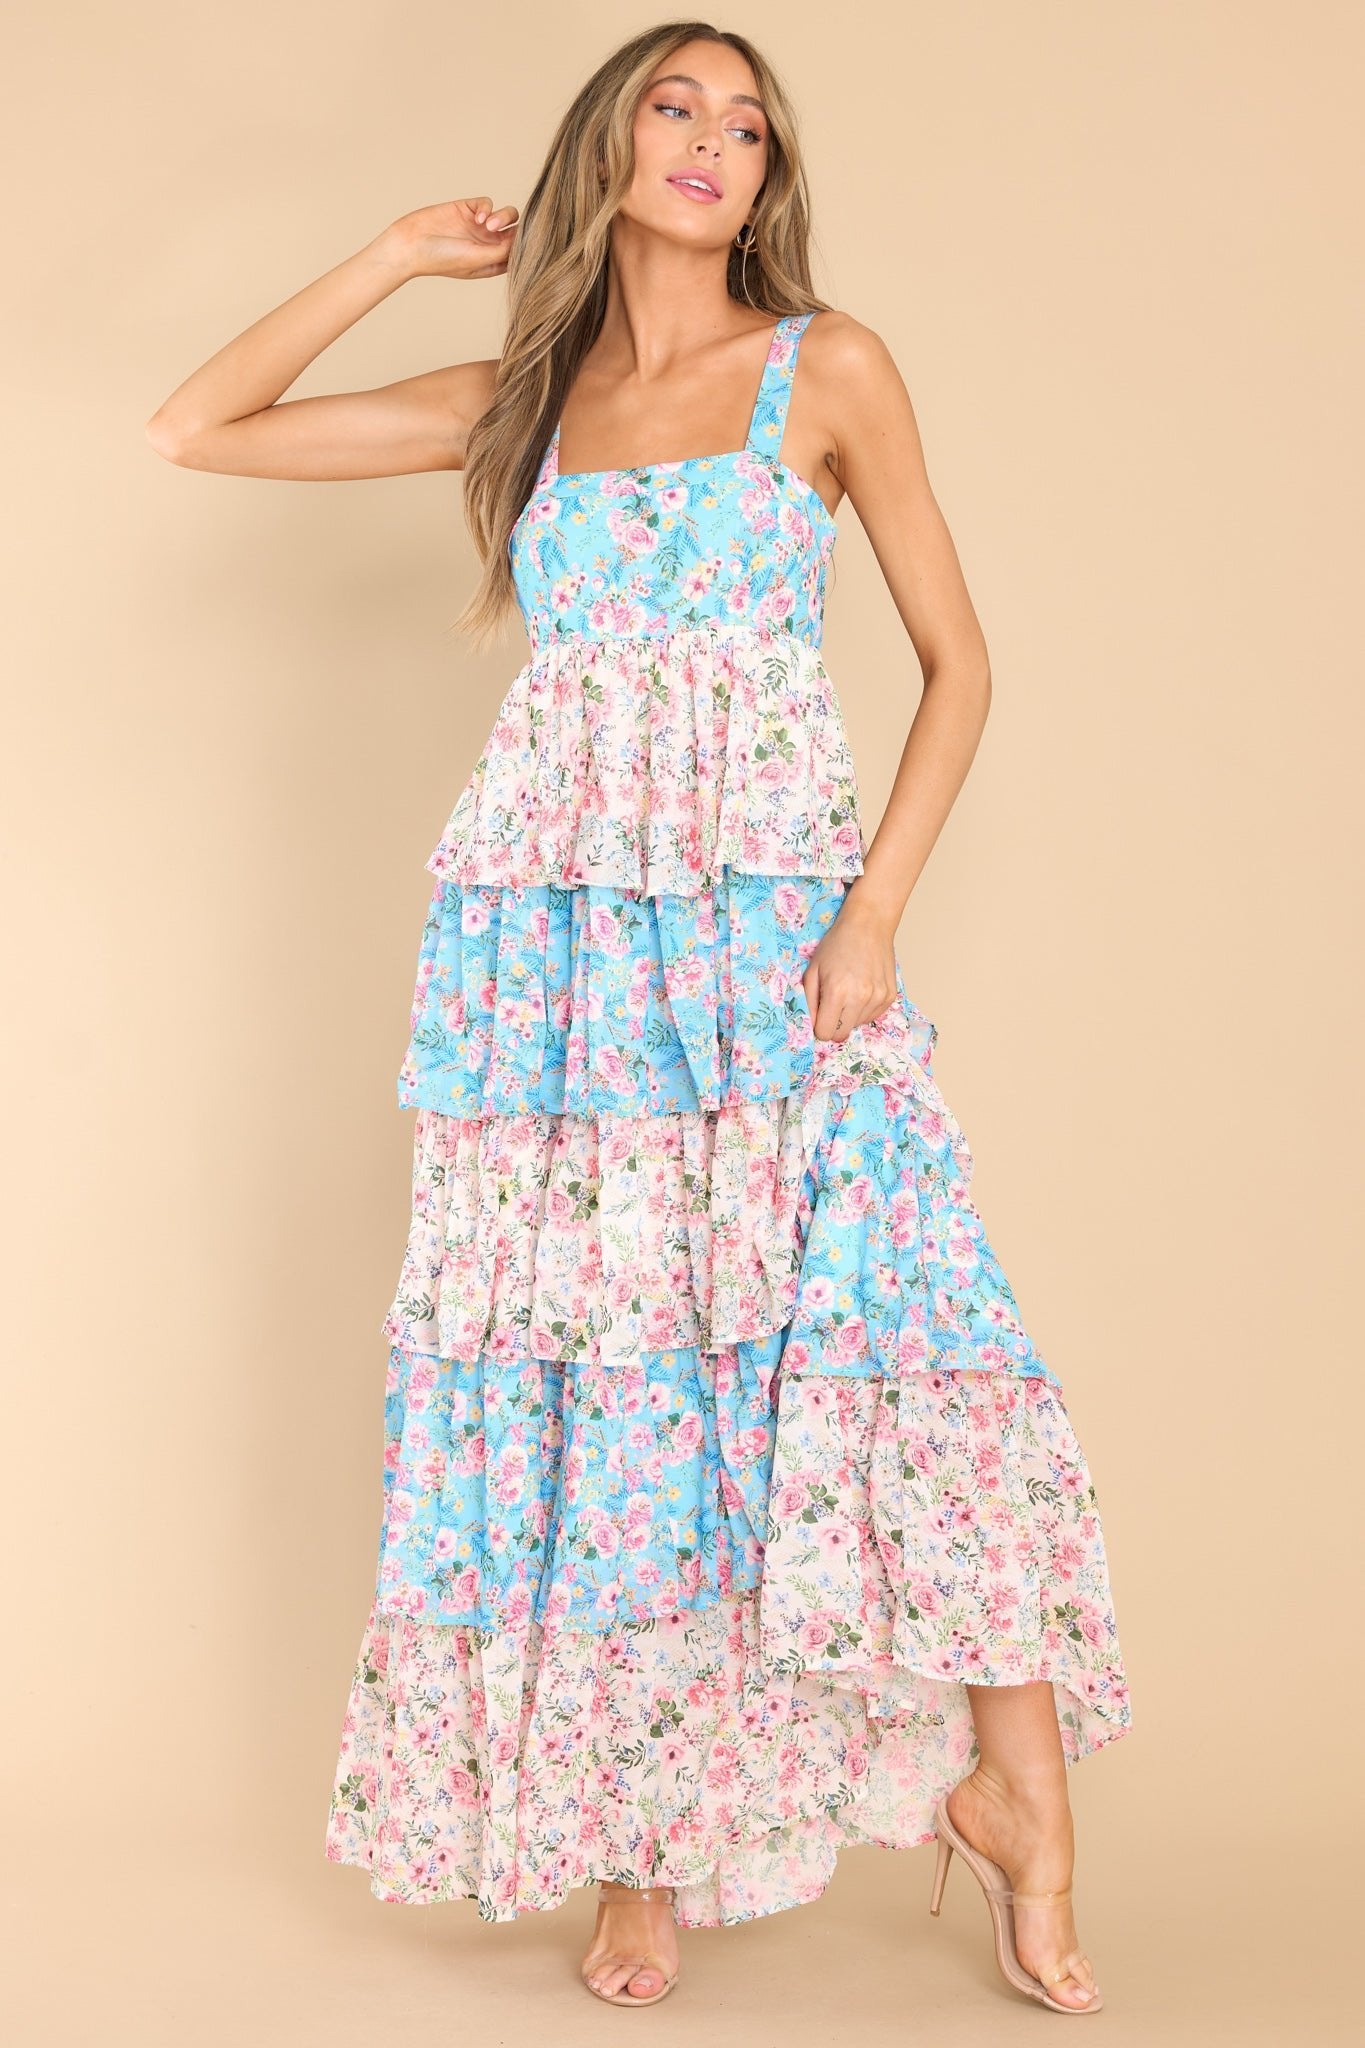 On the Edge of Spring Blue Floral Print Maxi Dress - Red Dress